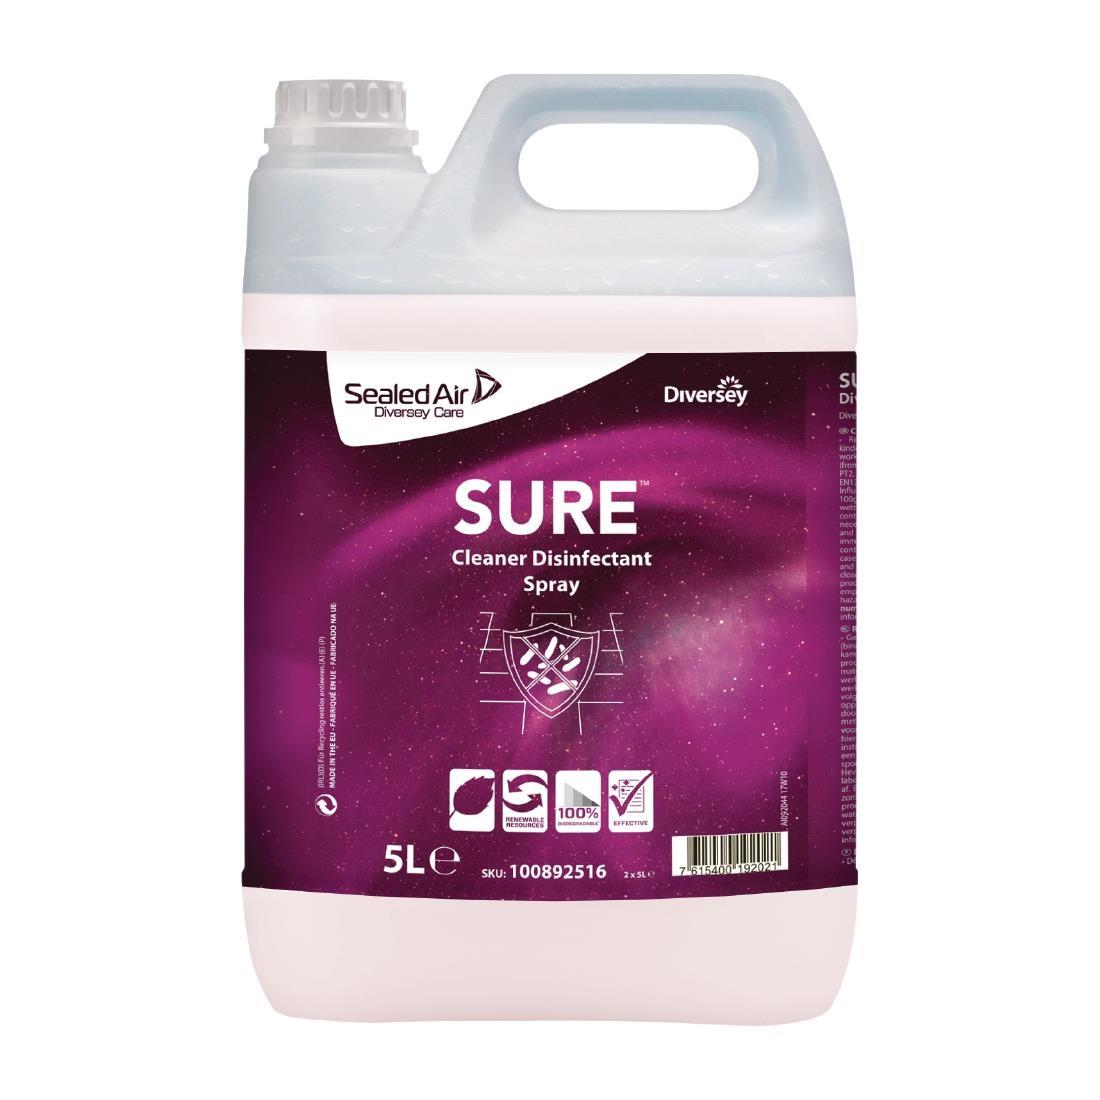 SURE Cleaner and Disinfectant Ready To Use 5Ltr (2 Pack) - FA240  - 1